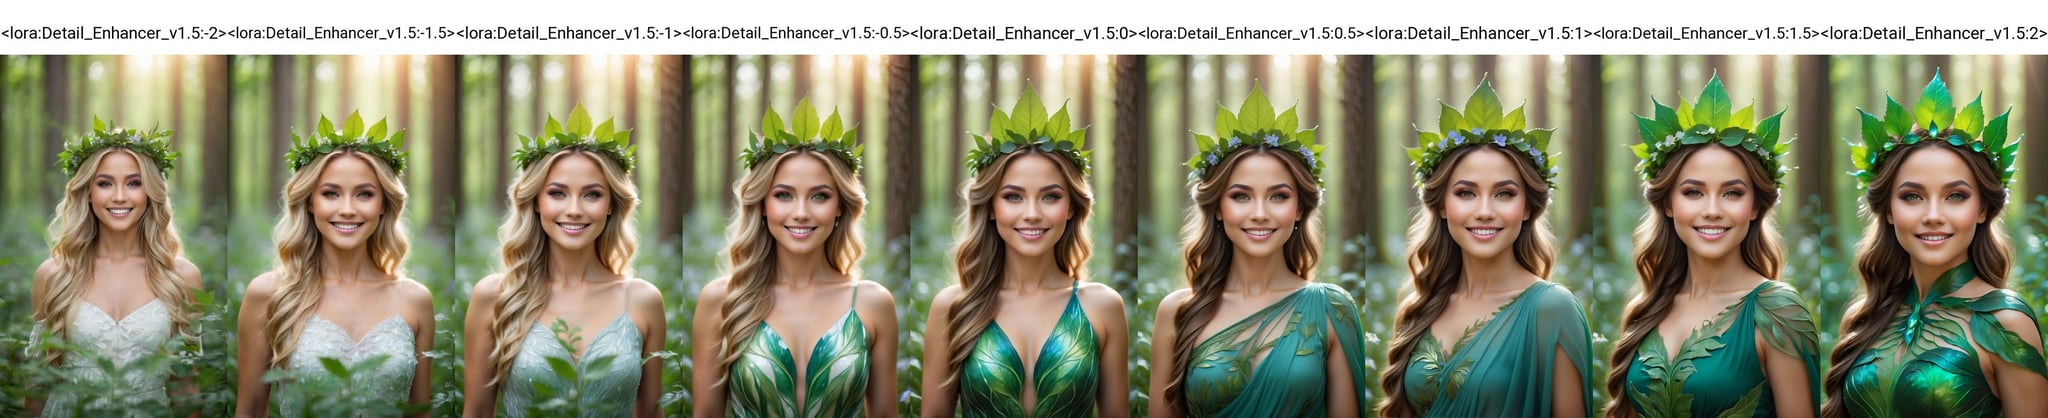 (best quality, 4k, 8k, highres, masterpiece:1.2), ultra-detailed, (realistic, photorealistic, photo-realistic:1.37), nature goddess, leaf body, portrait, cute smile, greenery, wildflowers, breathtaking eyes, serene expression, graceful pose, ethereal beauty, luminous skin, flowing hair, elegant crown of leaves, soft natural light, vibrant colors, mythical essence, surreal atmosphere, dreamlike aura, harmonious connection with nature, enchanted forest<lora:Detail_Enhancer_v1.5:-2>